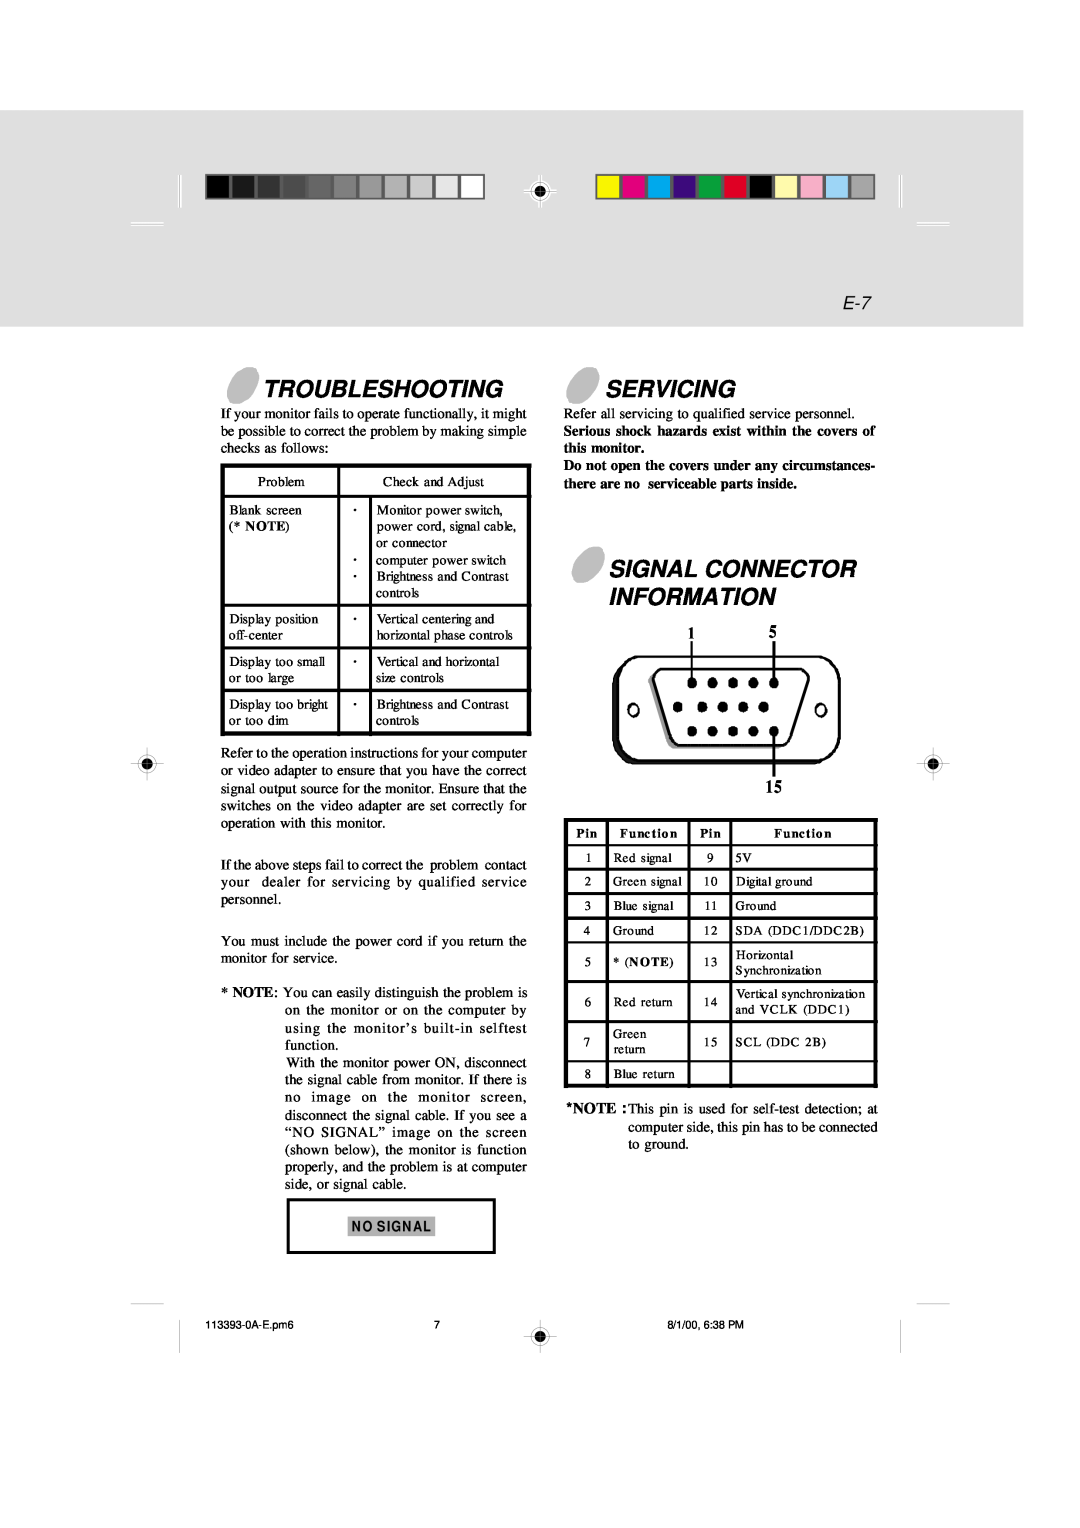 IBM 6331 user manual Troubleshooting, Servicing, Signal Connector Information, N O Sign Al 